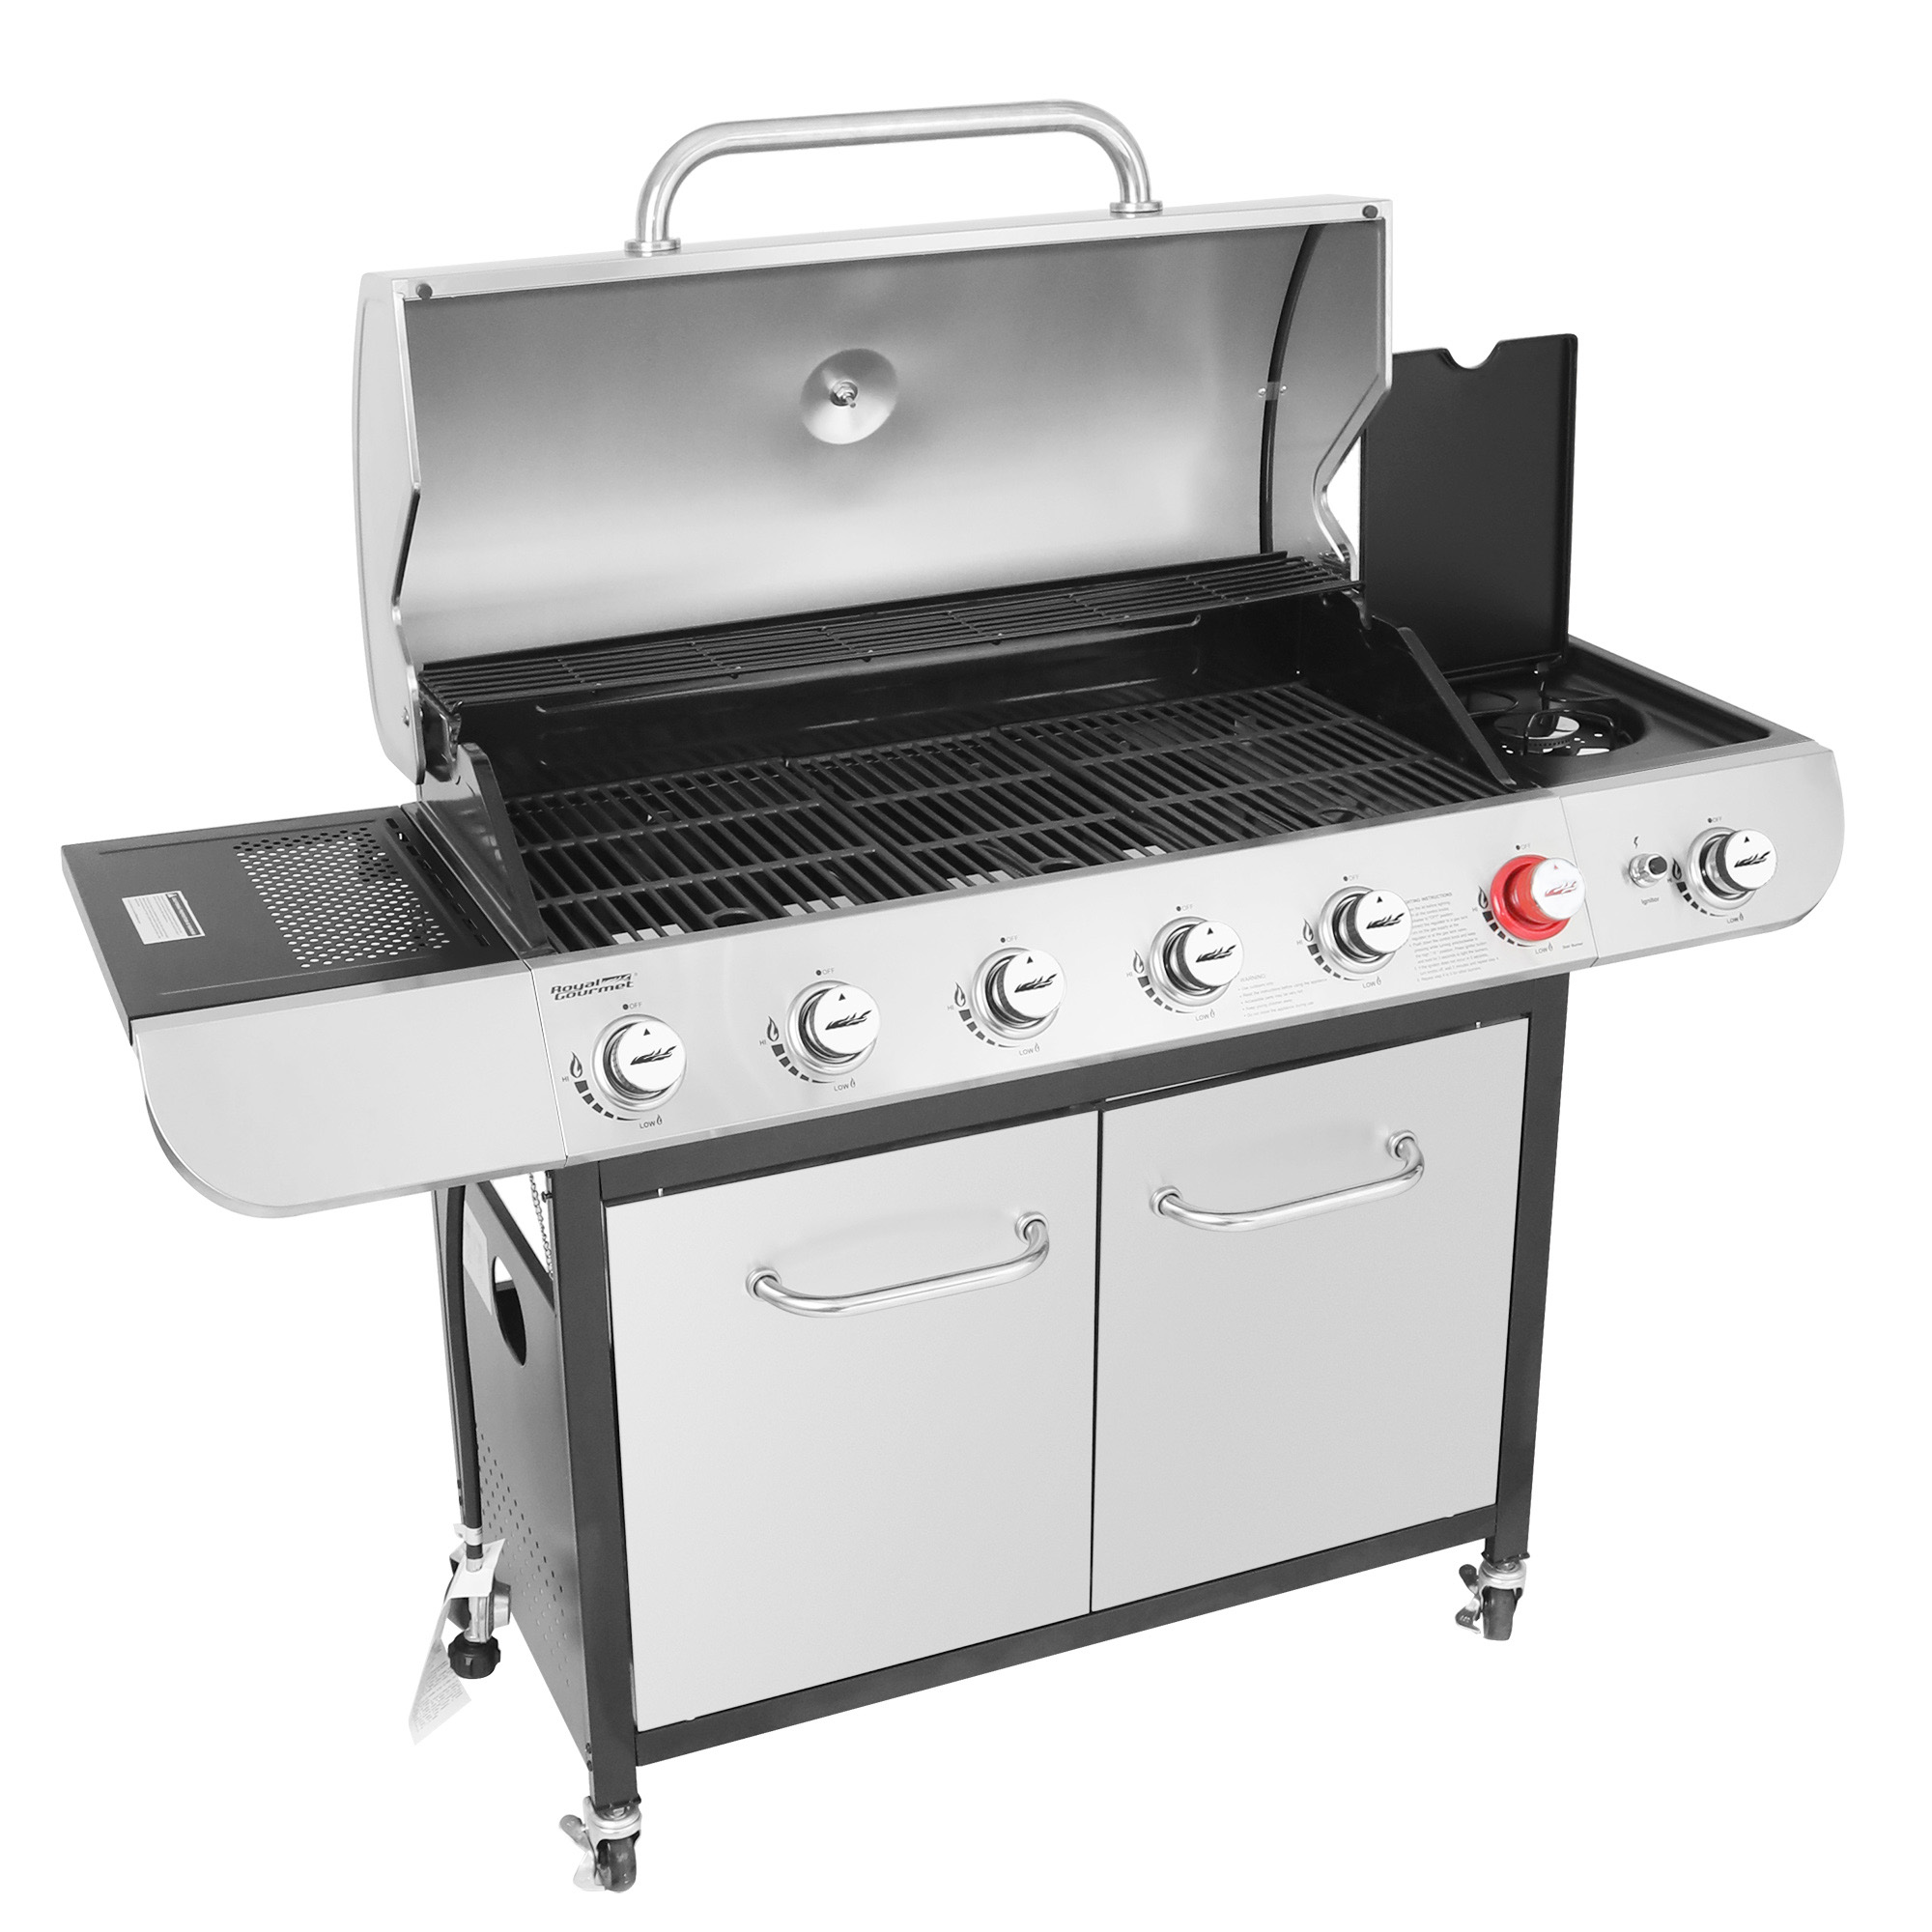 Royal Gourmet SG6002R 6-Burner BBQ Liquid Gas Grill with Sear and Side Burner, 71,000 BTU Cabinet Style Gas Grill, Outdoor Patio Garden Grill, Stainless Steel, Silver - image 4 of 8